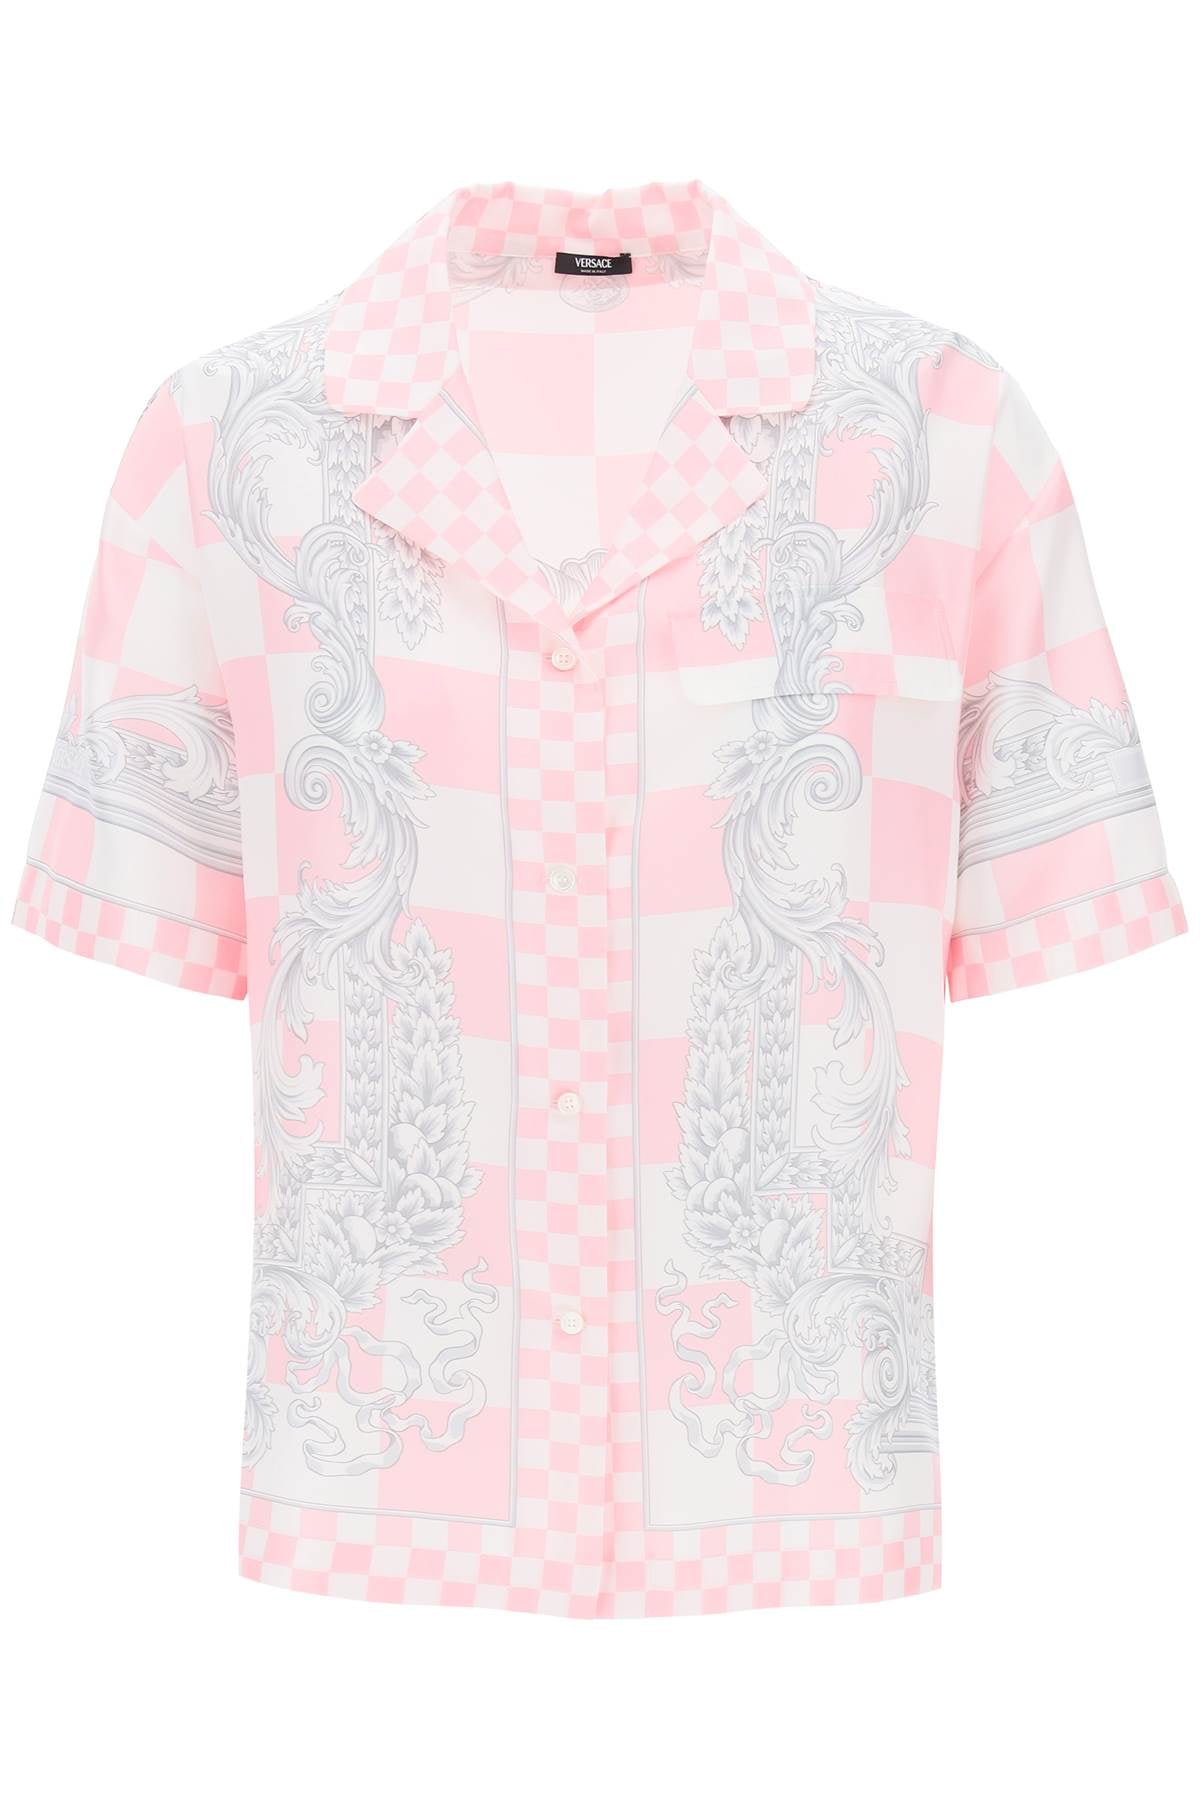 VERSACE Baroque Checkered Silk Shirt for Women in Pink and Purple